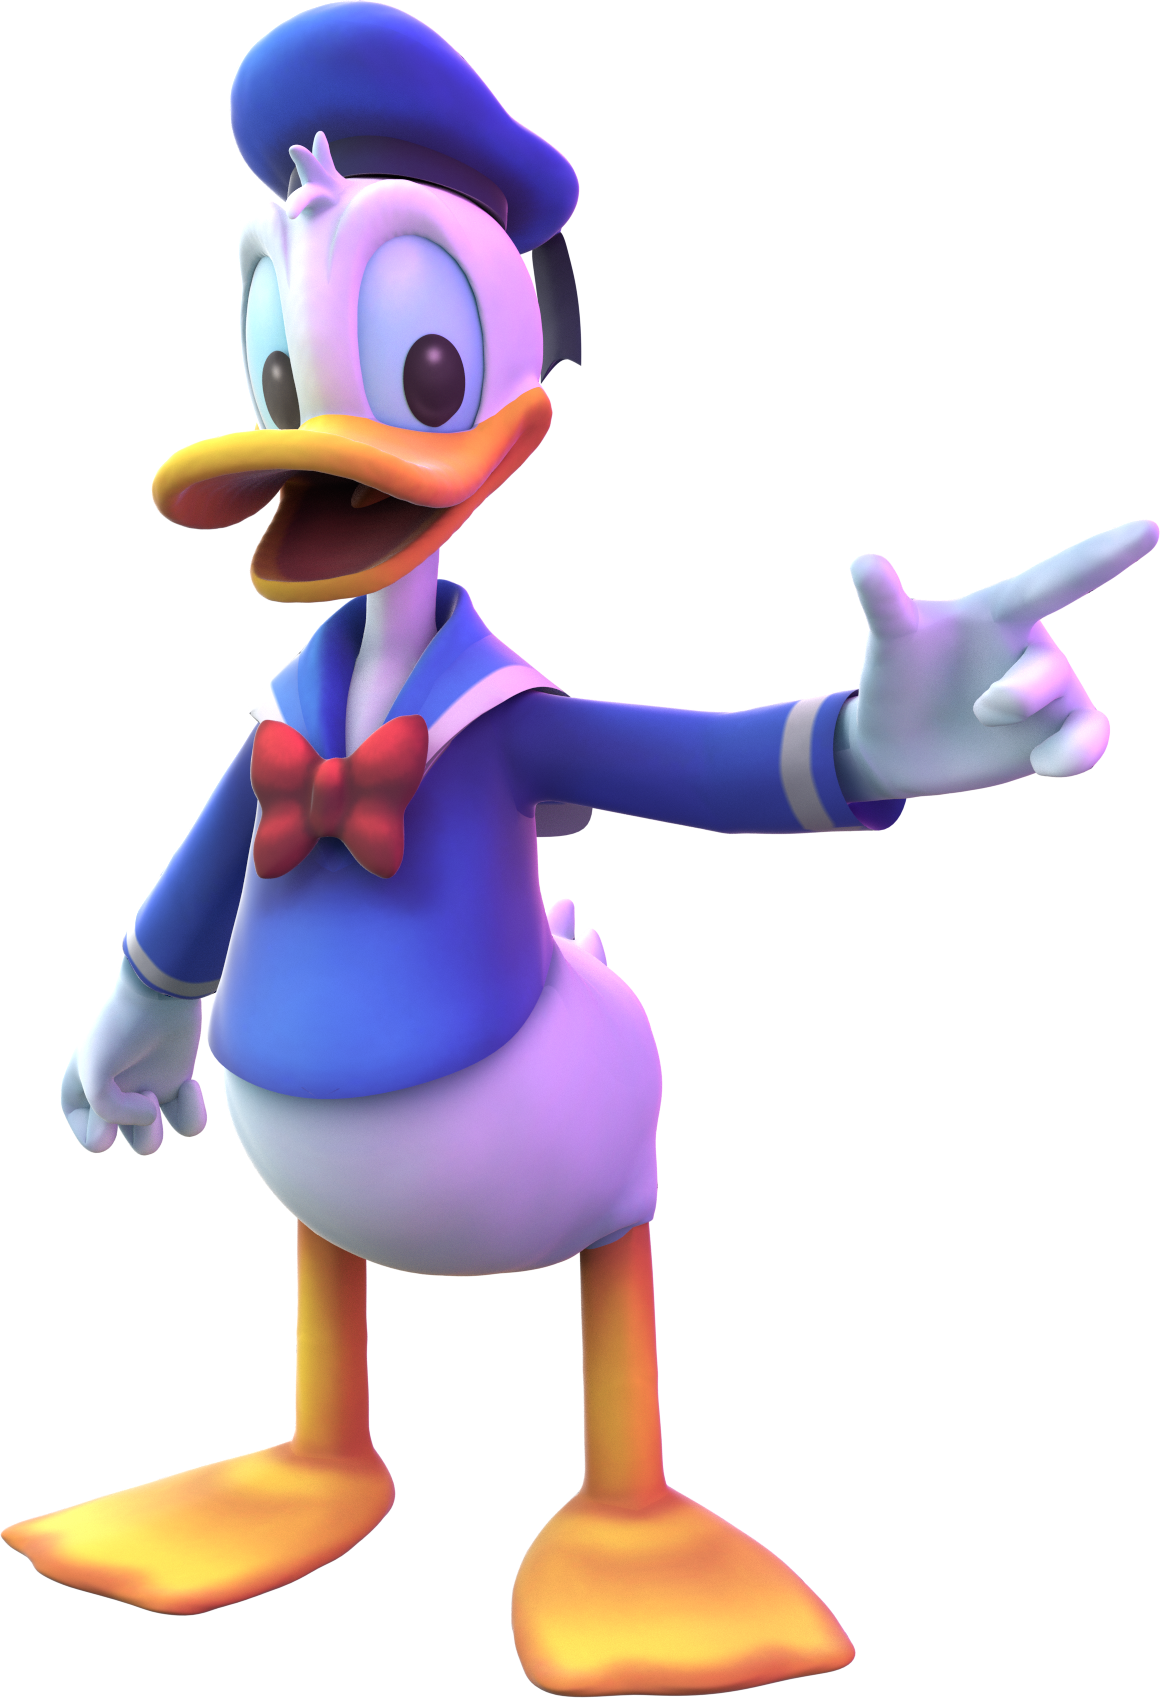 Donald duck png images. Ducks clipart animated